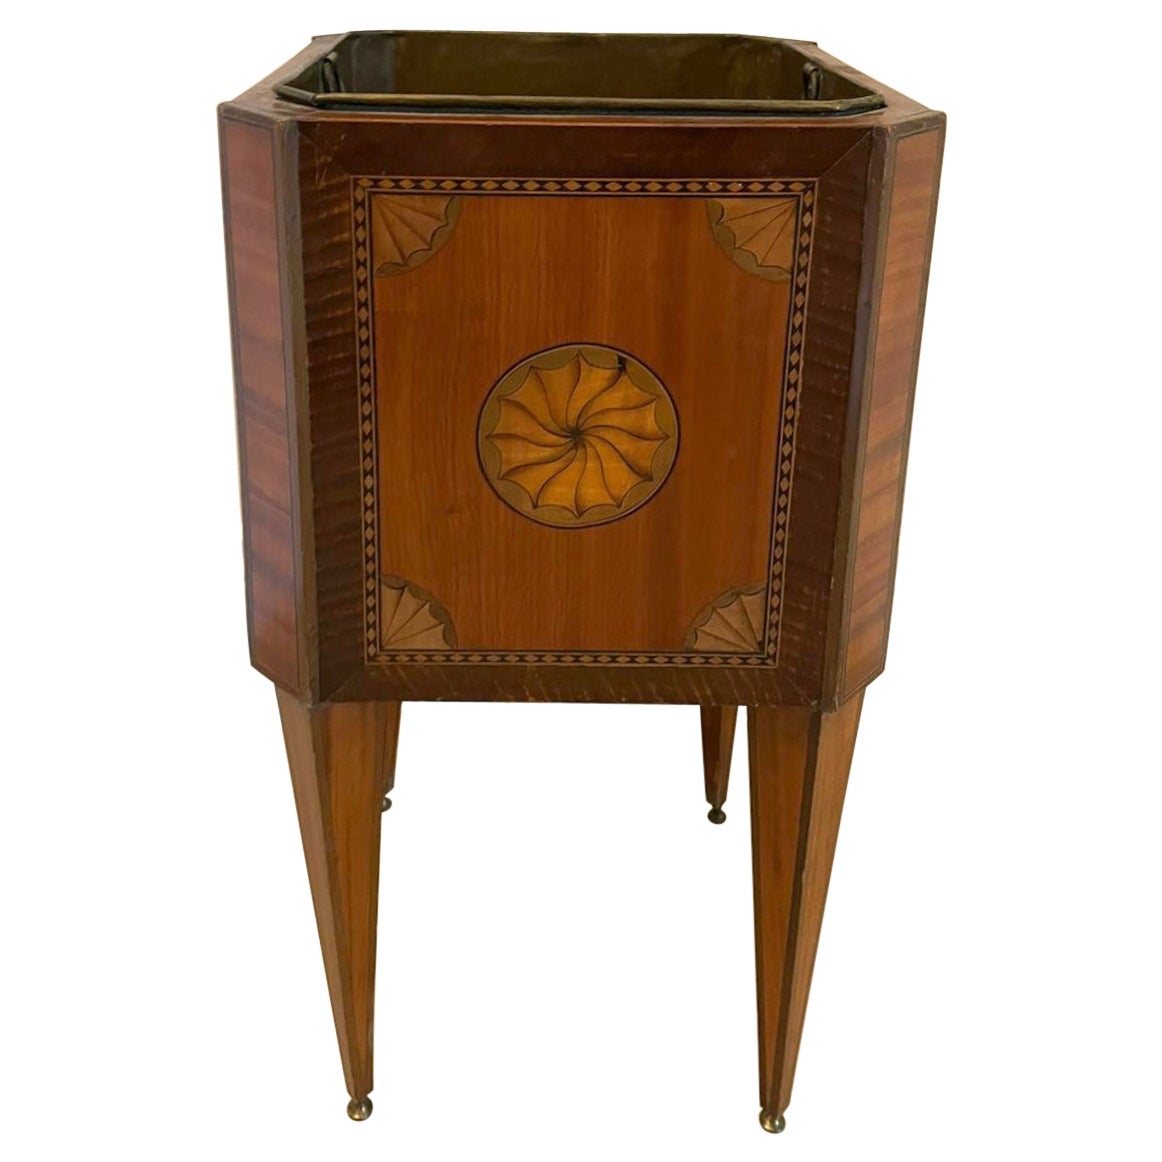 Antique George III Quality Satinwood Inlaid Freestanding Champagne/Wine Cooler For Sale